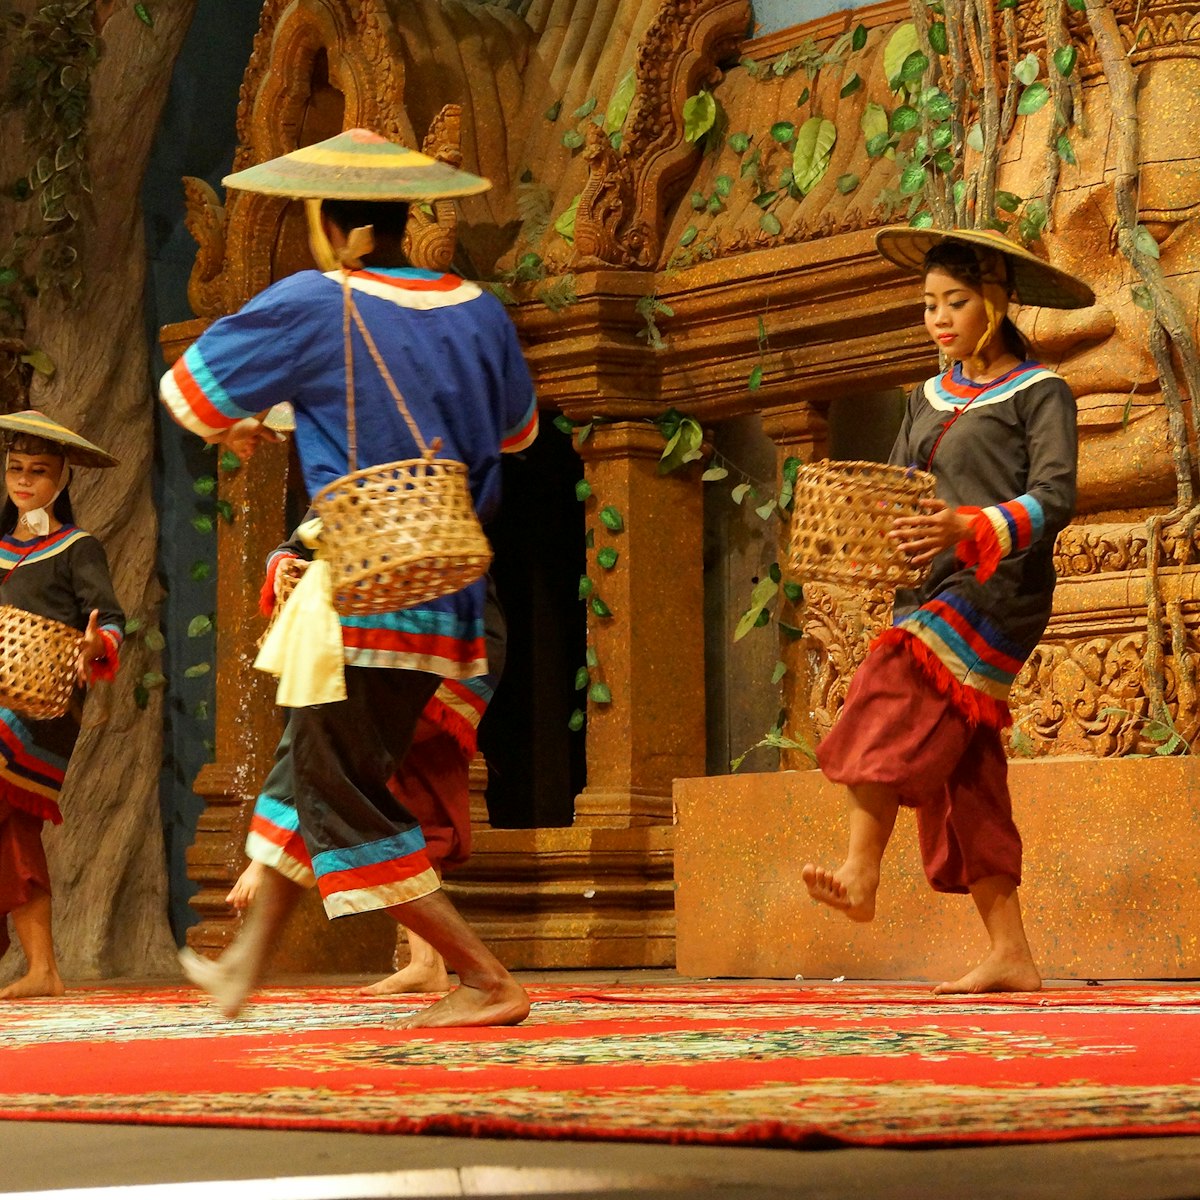 SIEM REAP, CAMBODIA - FEB 14, 2015 - Traditional Cambodian basket dance from rural village, Banteay Srei Cambodia; Shutterstock ID 325662506; Your name (First / Last): Josh Vogel; GL account no.: 56530; Netsuite department name: Online Design; Full Product or Project name including edition: Digital Content/Sights